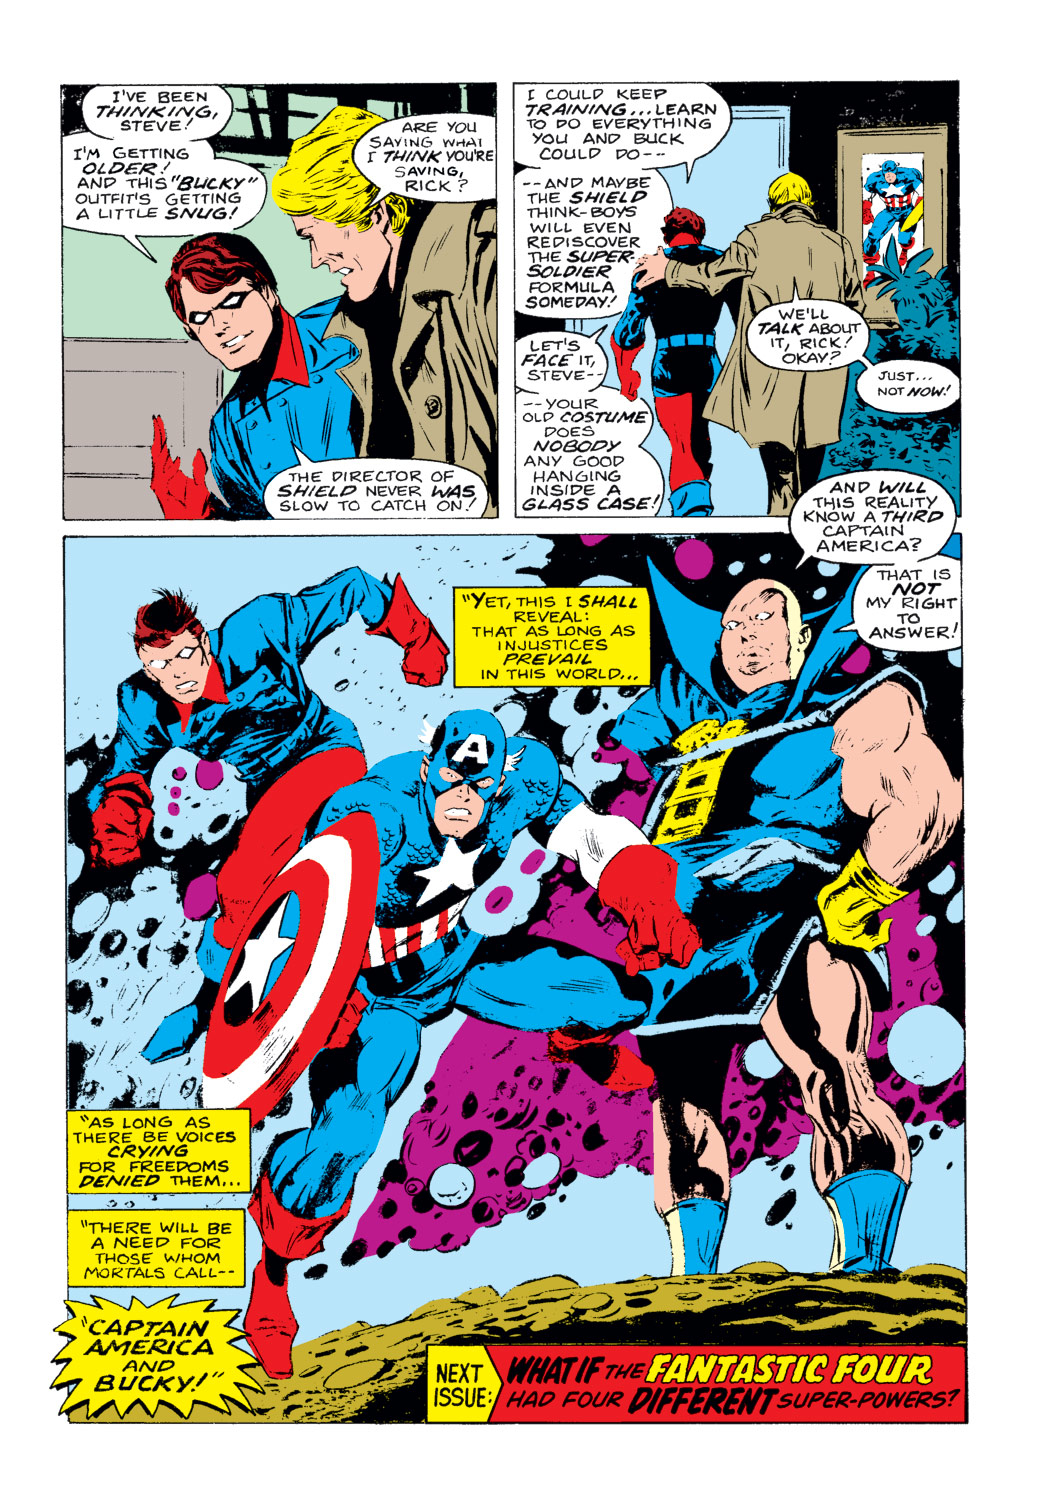 What If? (1977) Issue #5 - Captain America hadn't vanished during World War Two #5 - English 34